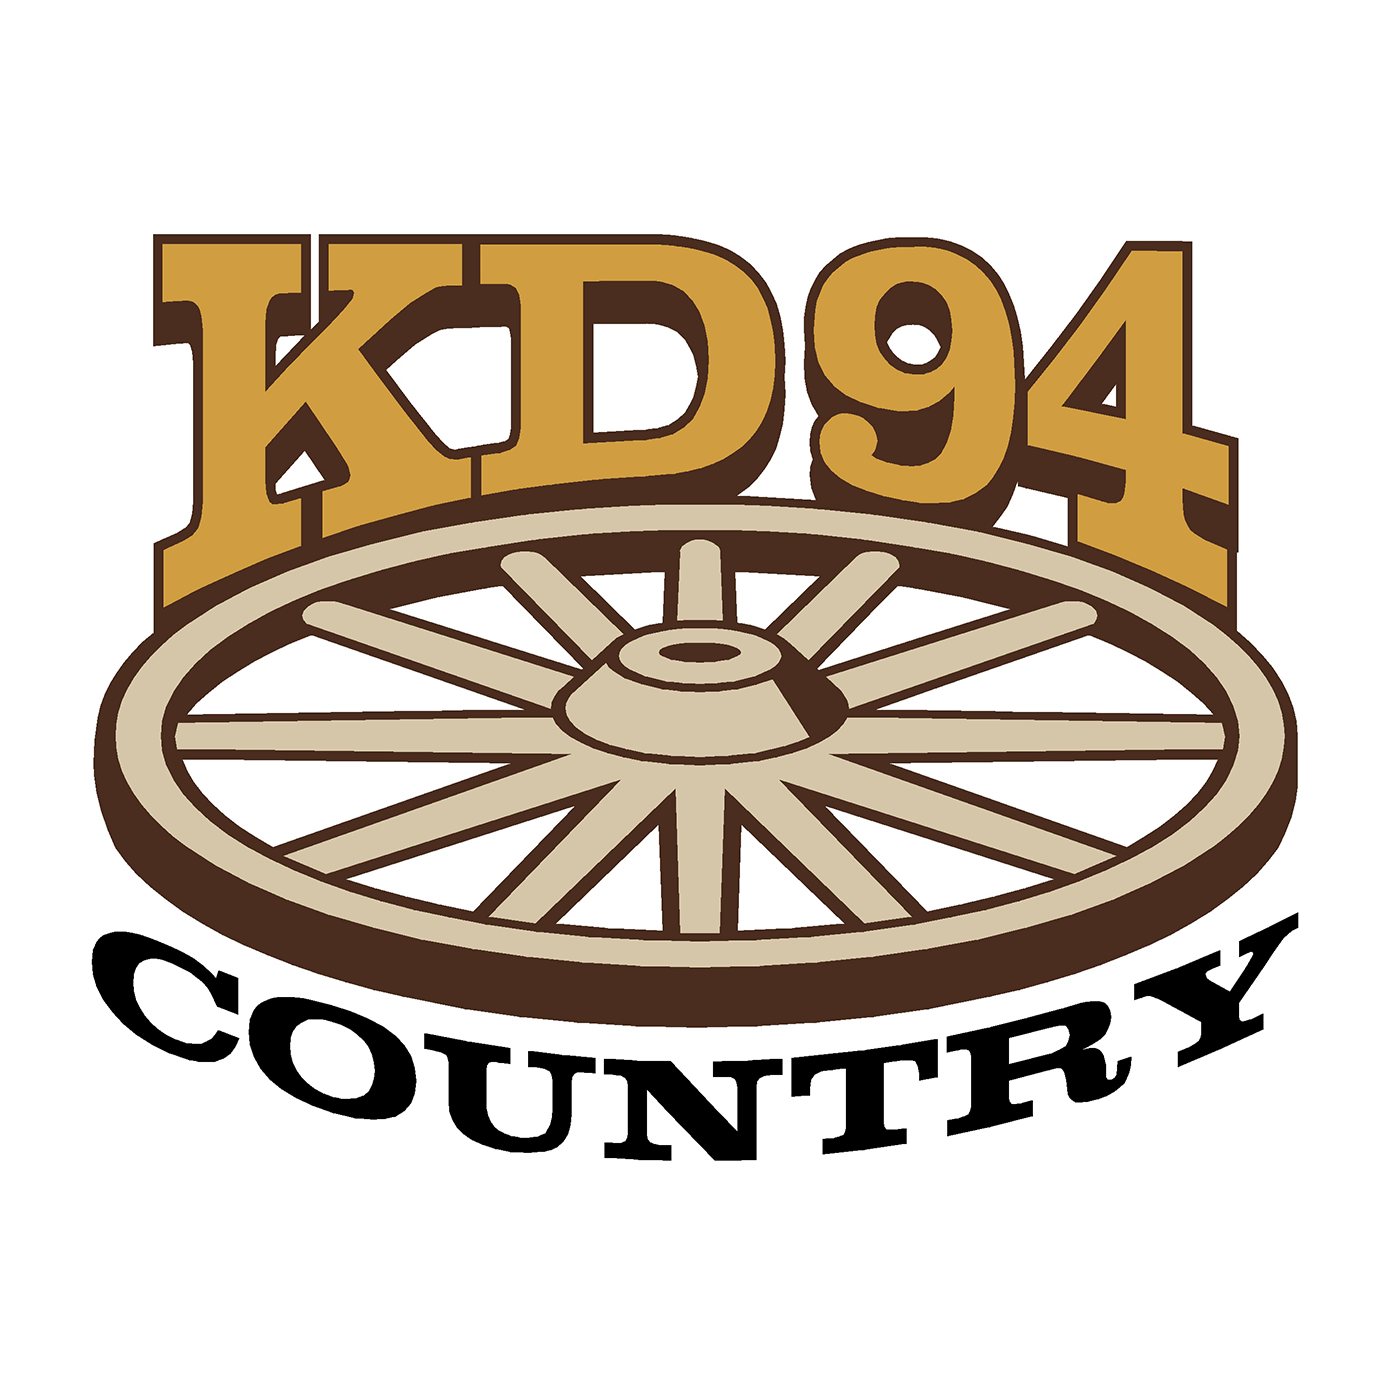  KDNS (KD Country 95)/Downs, KS To Relaunch May 15th